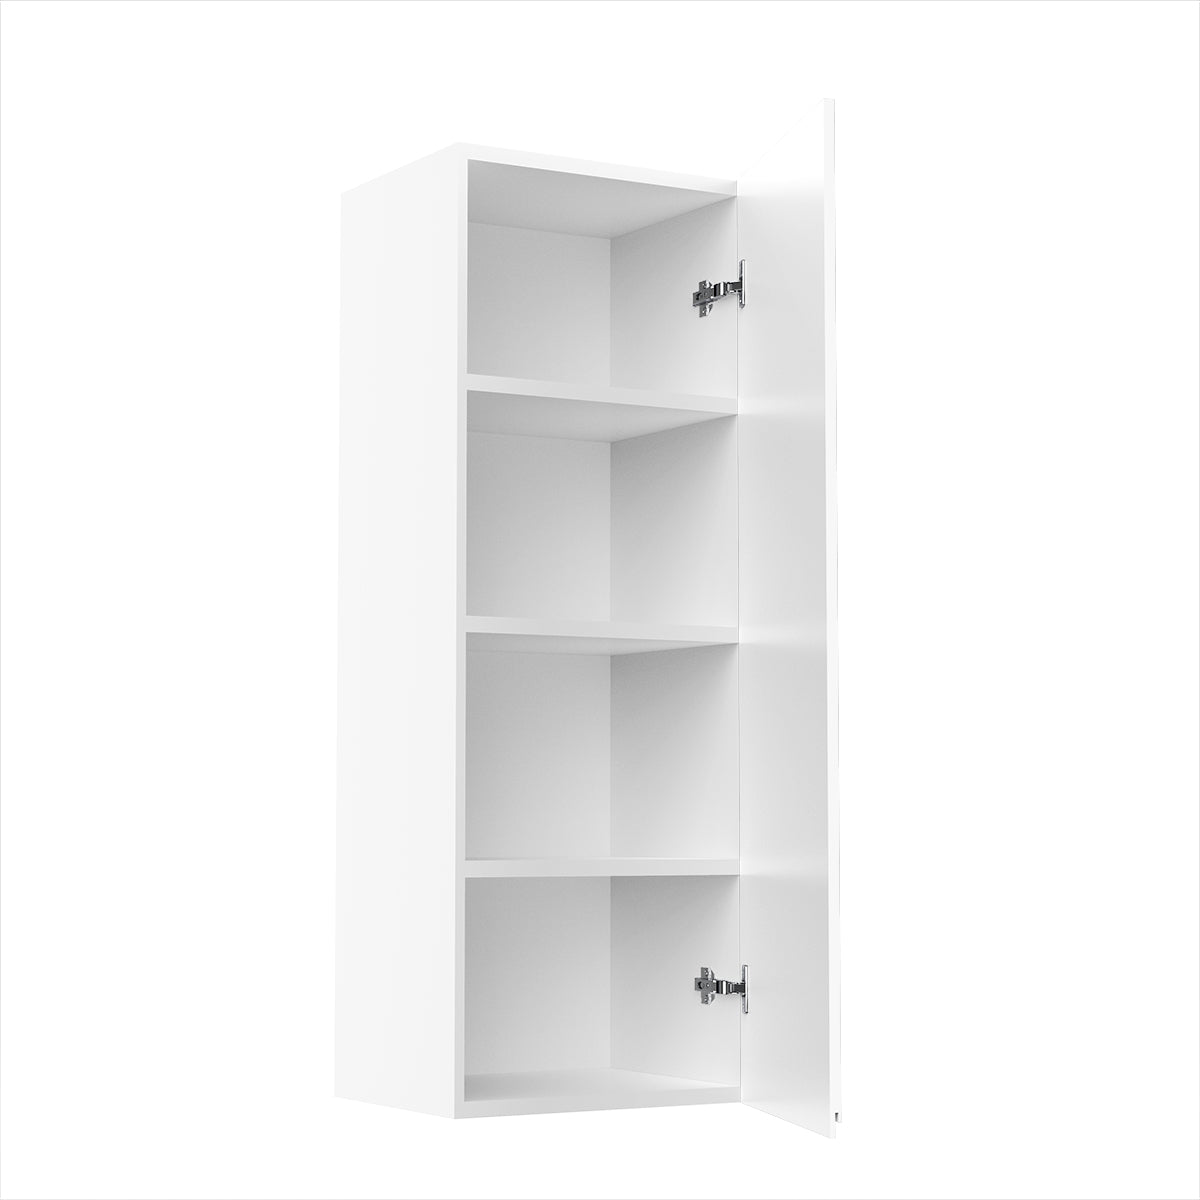 Kitchen Wall Cabinet - RTA - Lacquer white - Single Door Wall Cabinet | 15"W x 42"H x 12"D